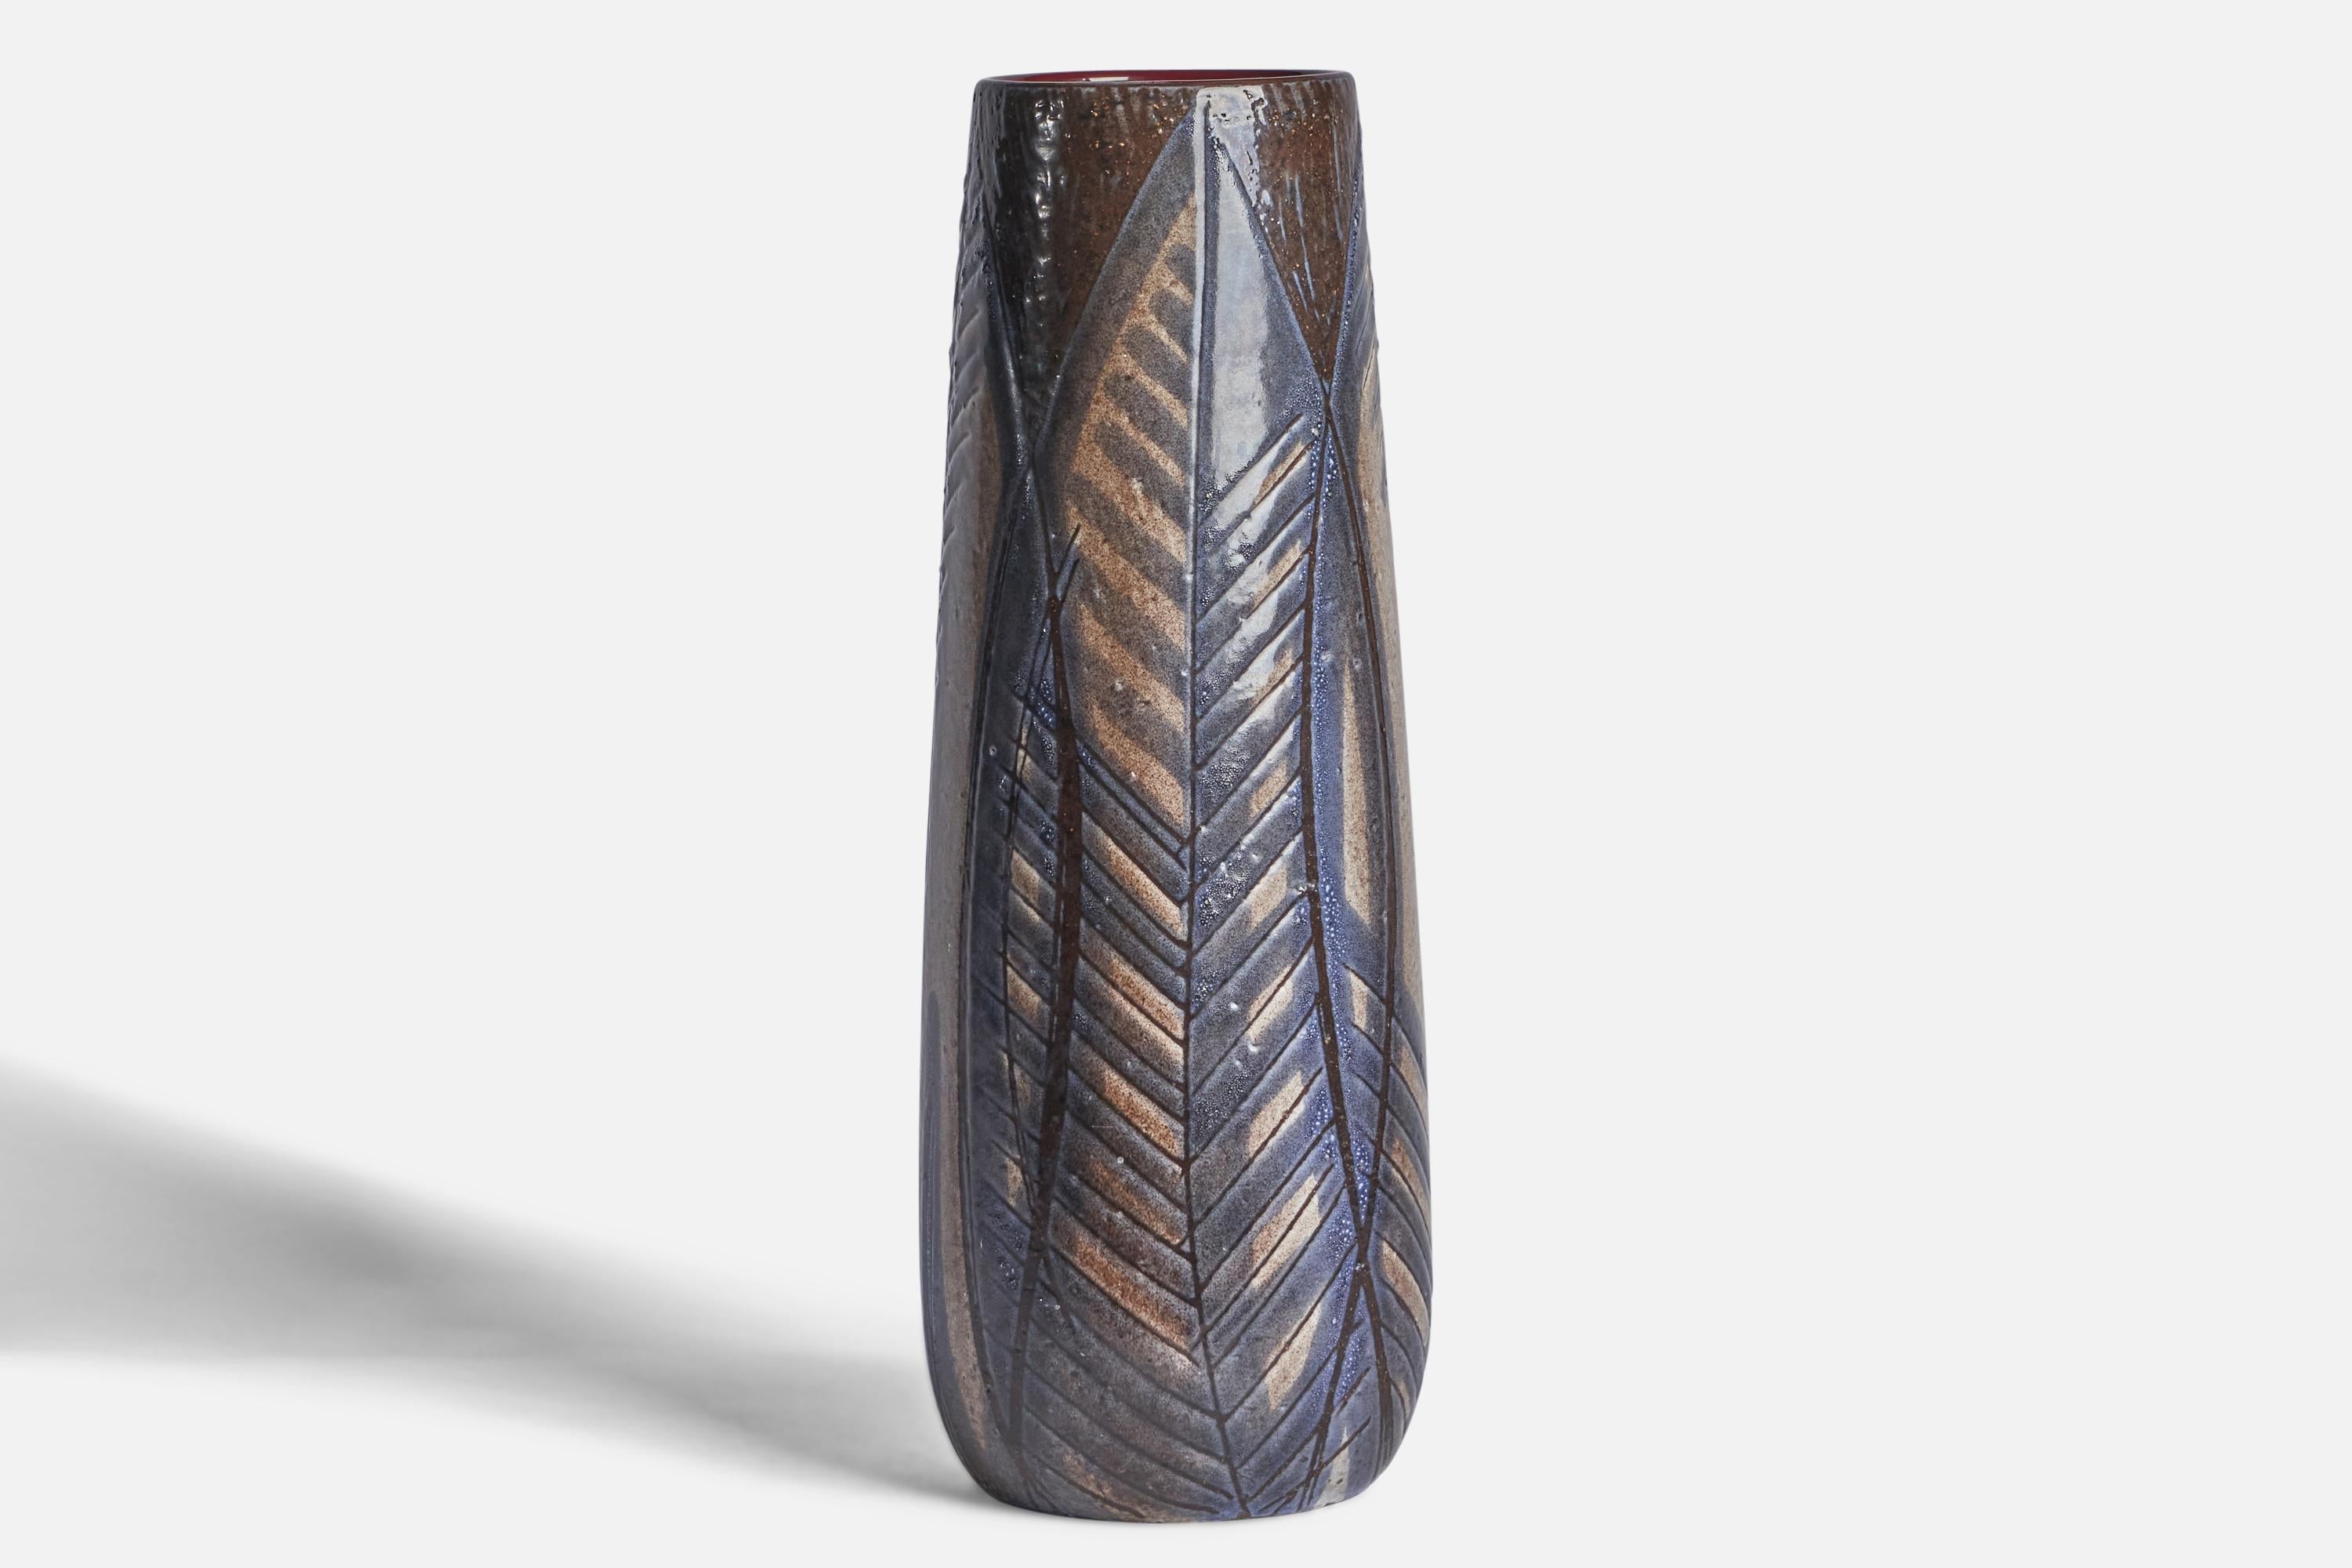 A blue, brown and red-glazed earthenware floor vase designed by Ingrid Atterberg and produced by Upsala Ekeby, Sweden, c. 1950s.